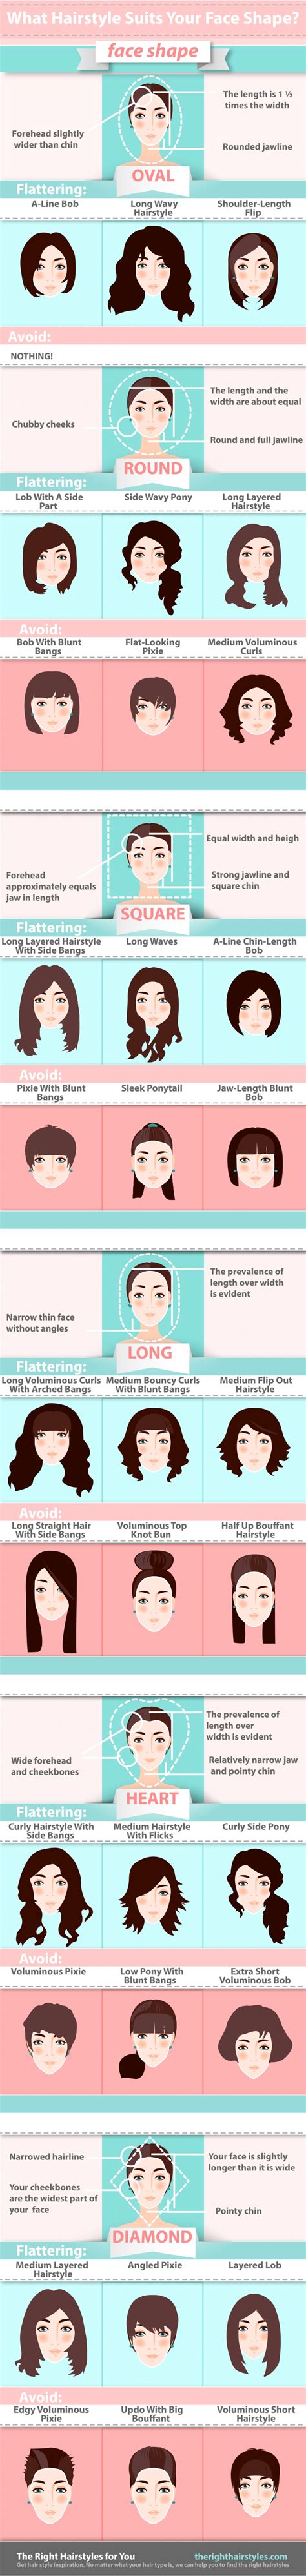 Guide To The Best Hairstyles To Suit Your Face Shape My Hair Care